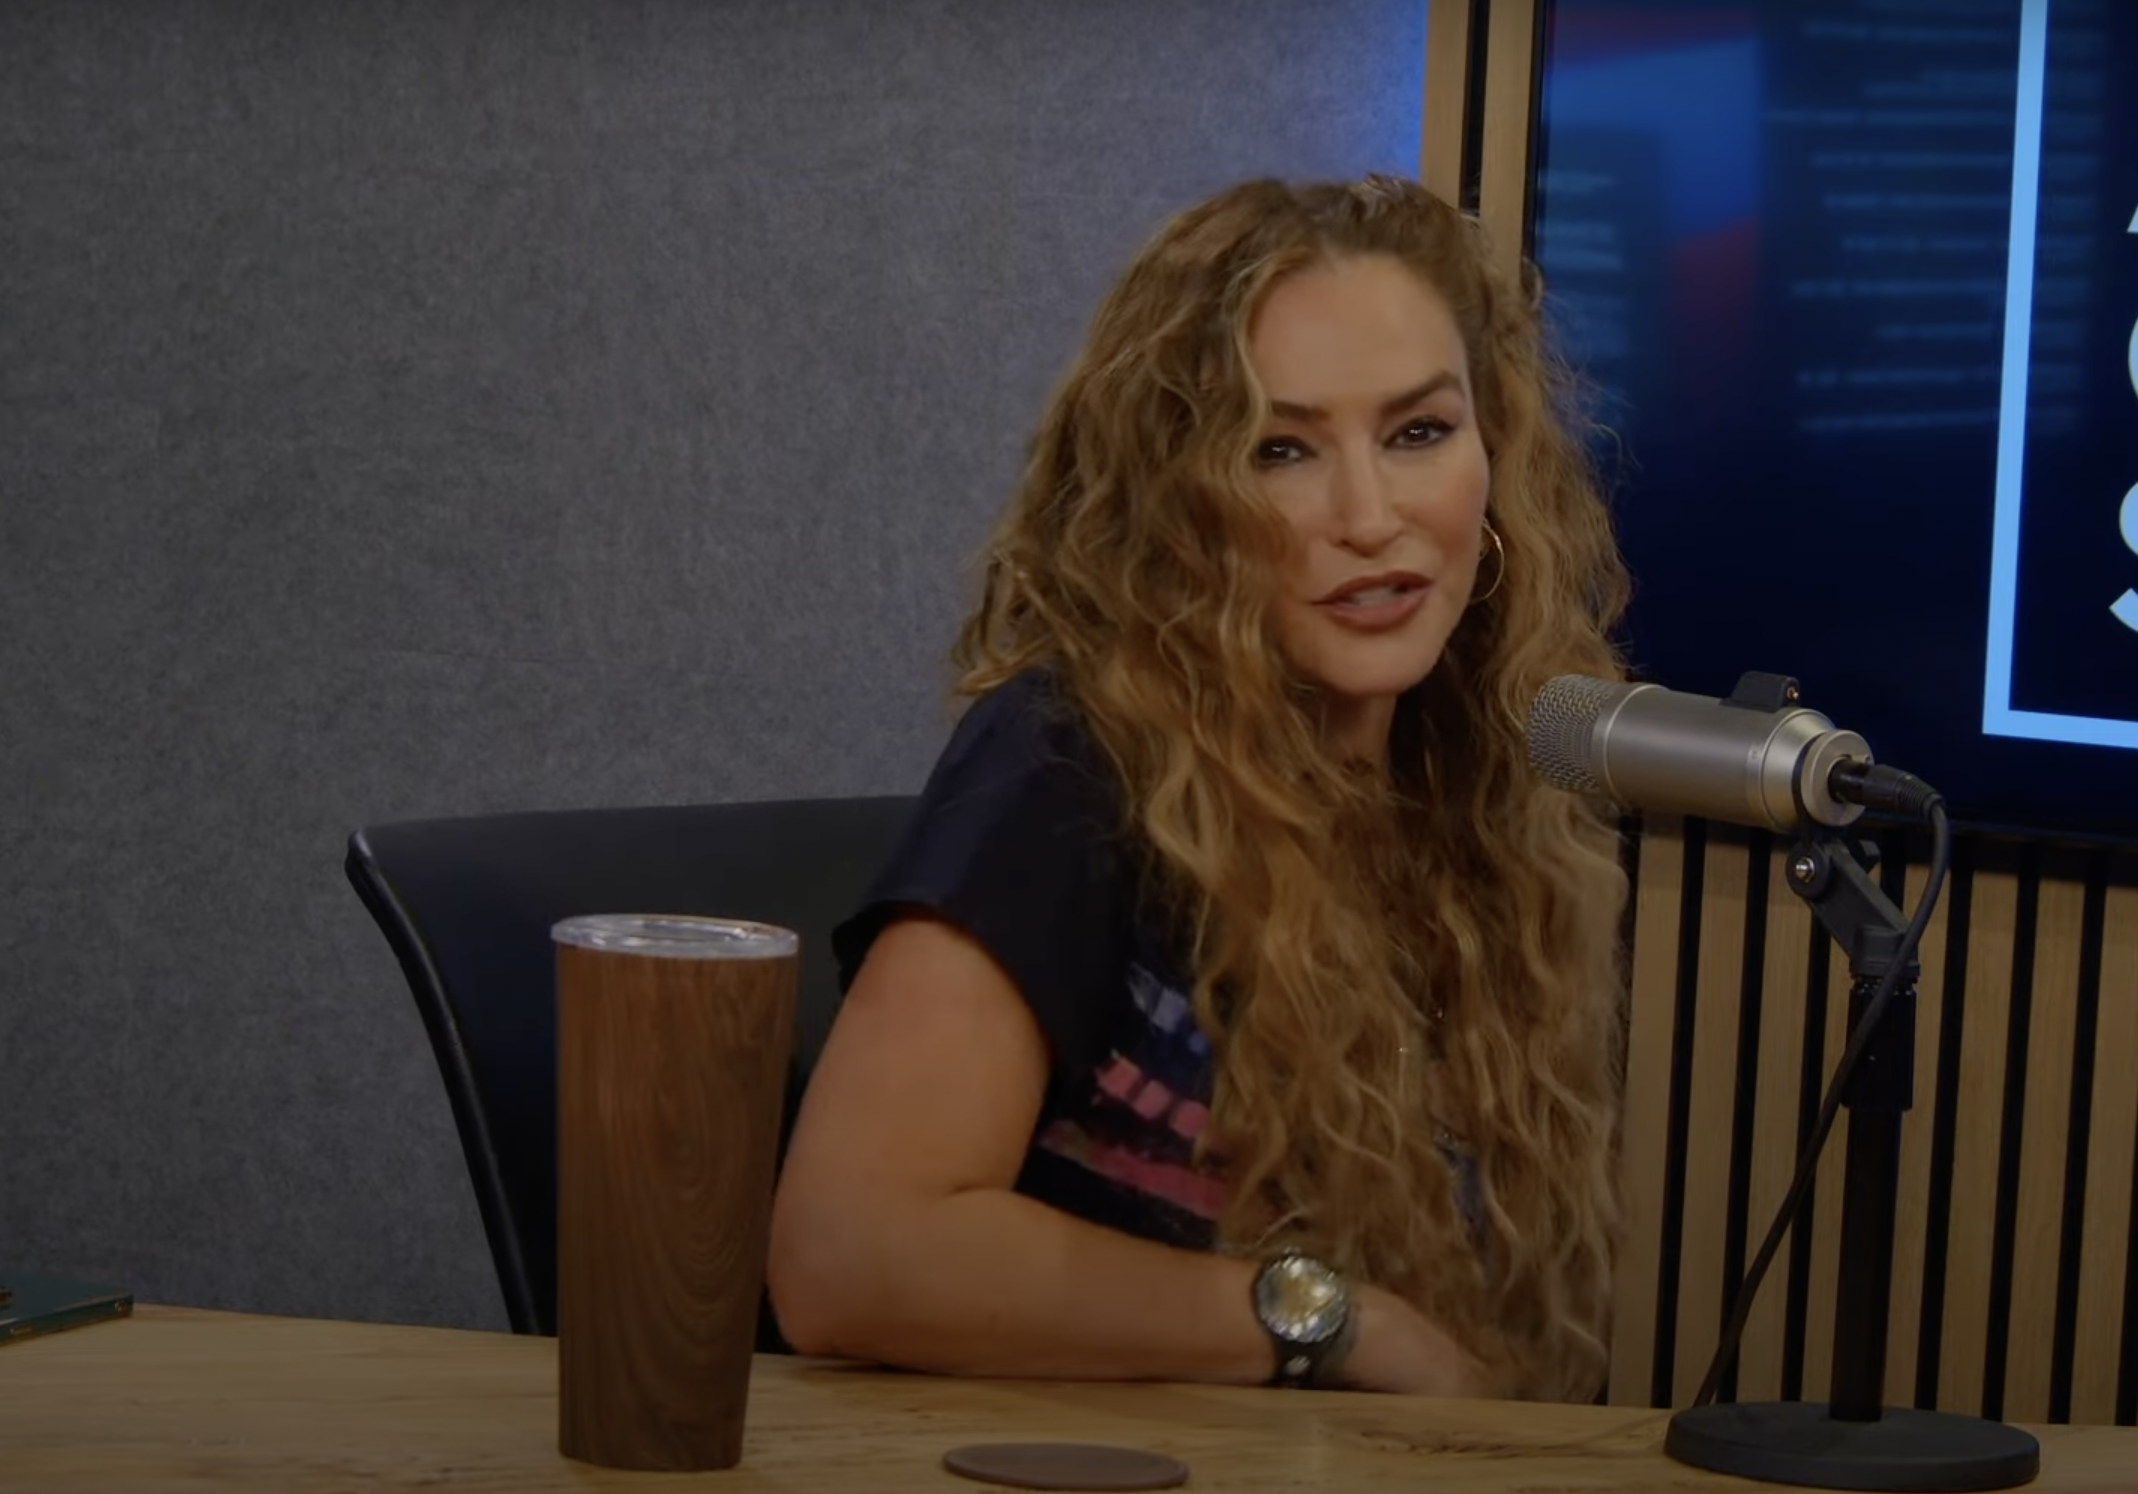 Sopranos’ Drea de Matteo Reveals Staggering Amount She Makes From OnlyFans